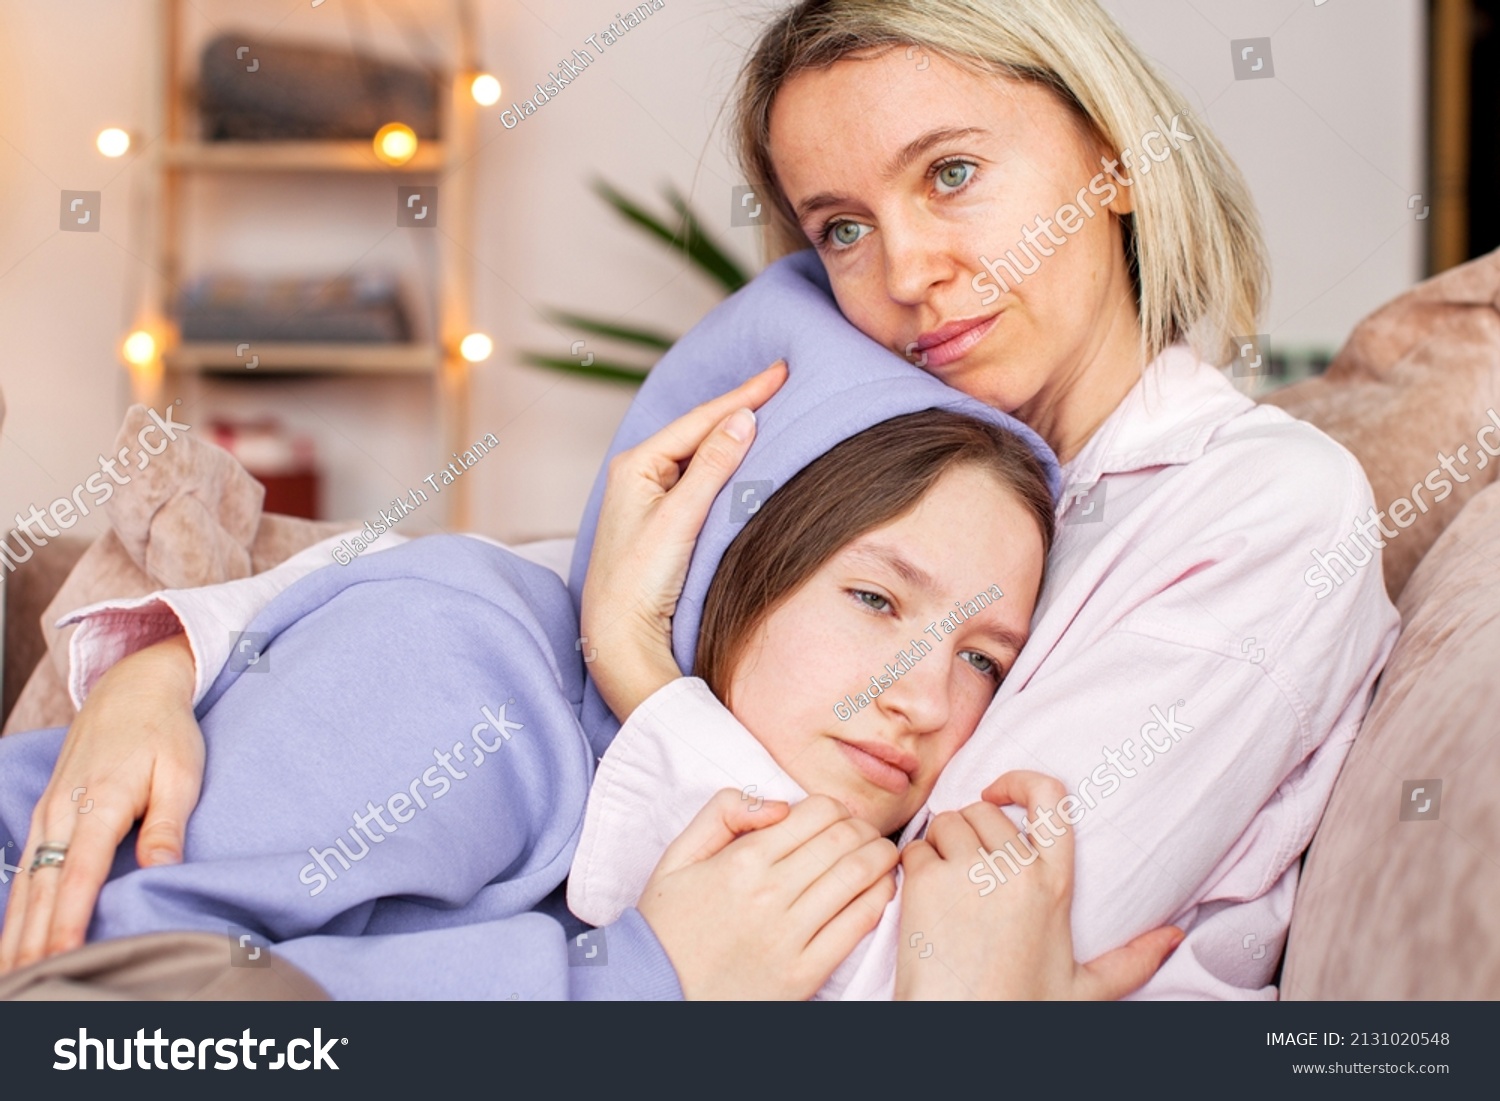 Caring Caucasian mother talk comfort unhappy sad teenage daughter suffering from school bullying or psychological problems, loving mom support make peace with depressed introvert teen girl child #2131020548